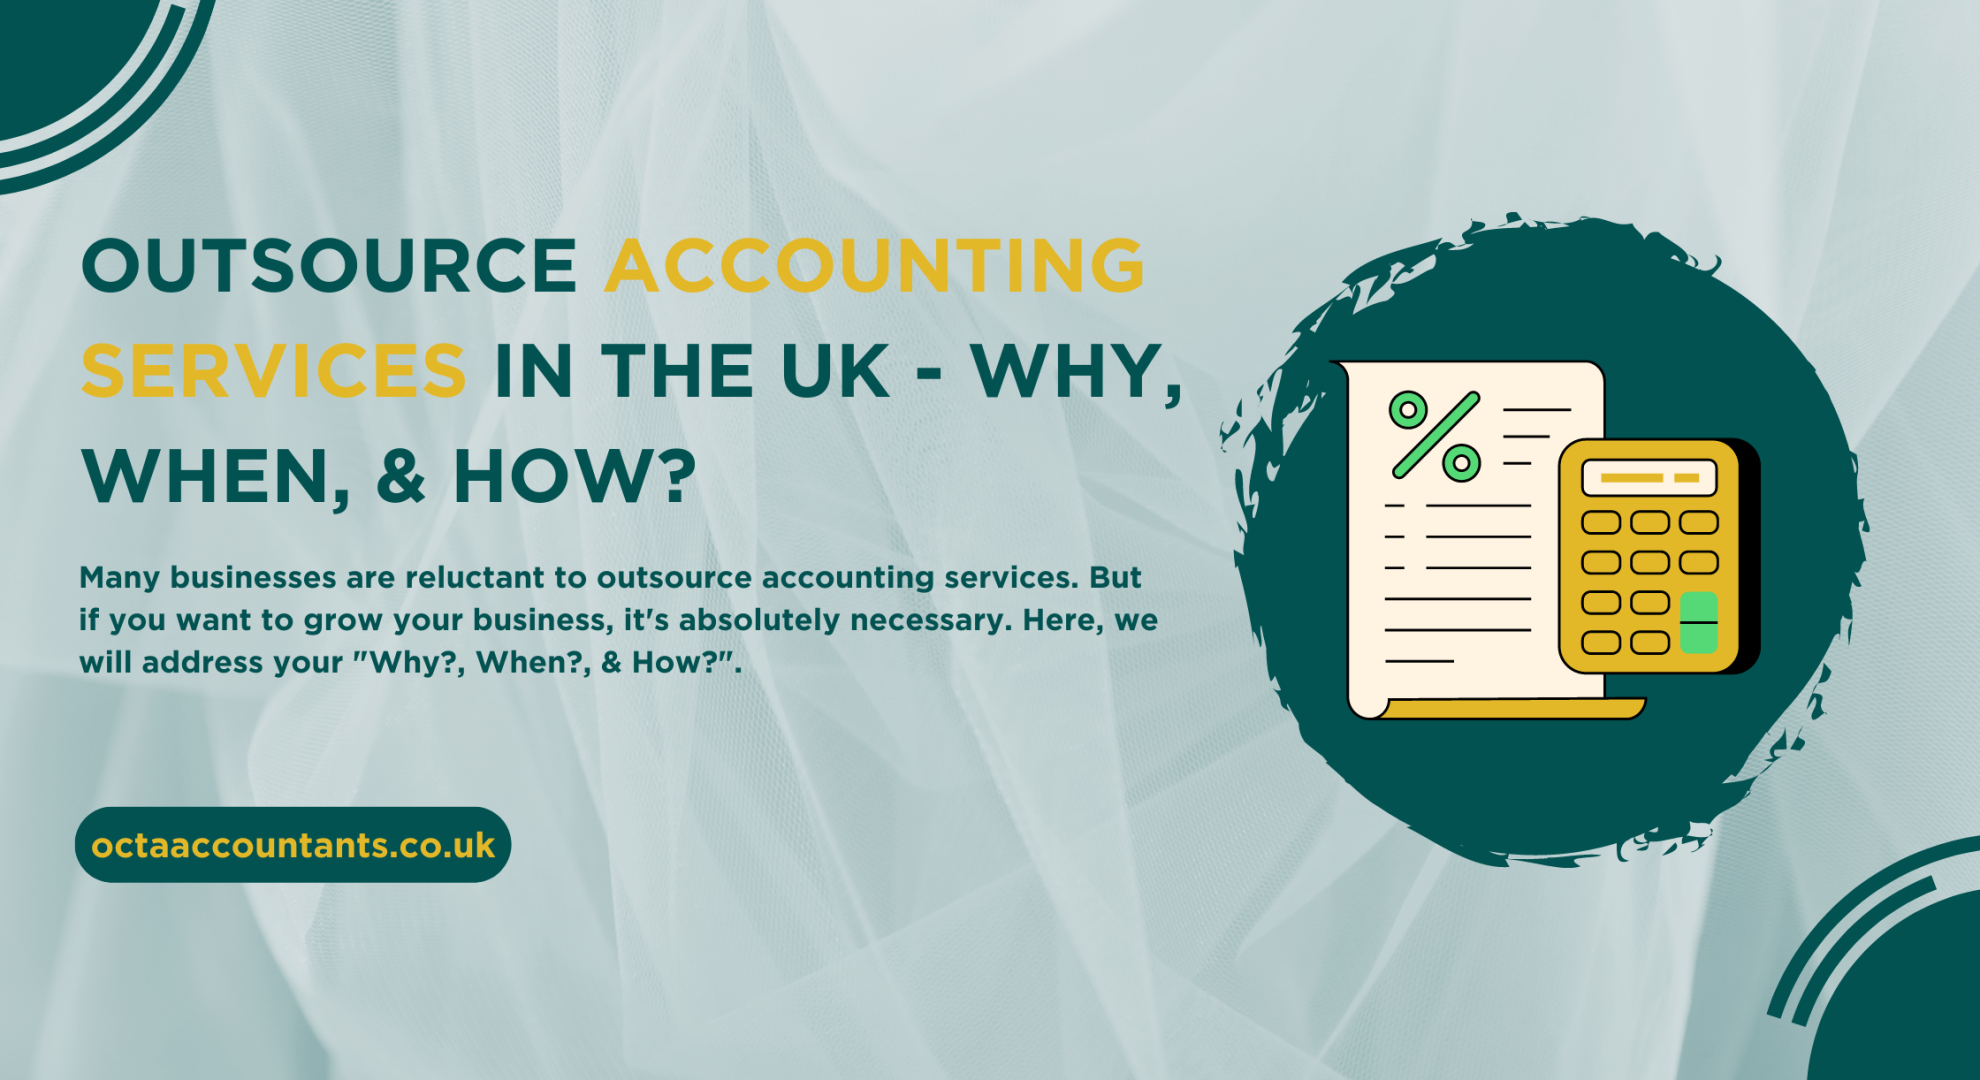 Outsource Accounting Services in the UK - Why, When, & How